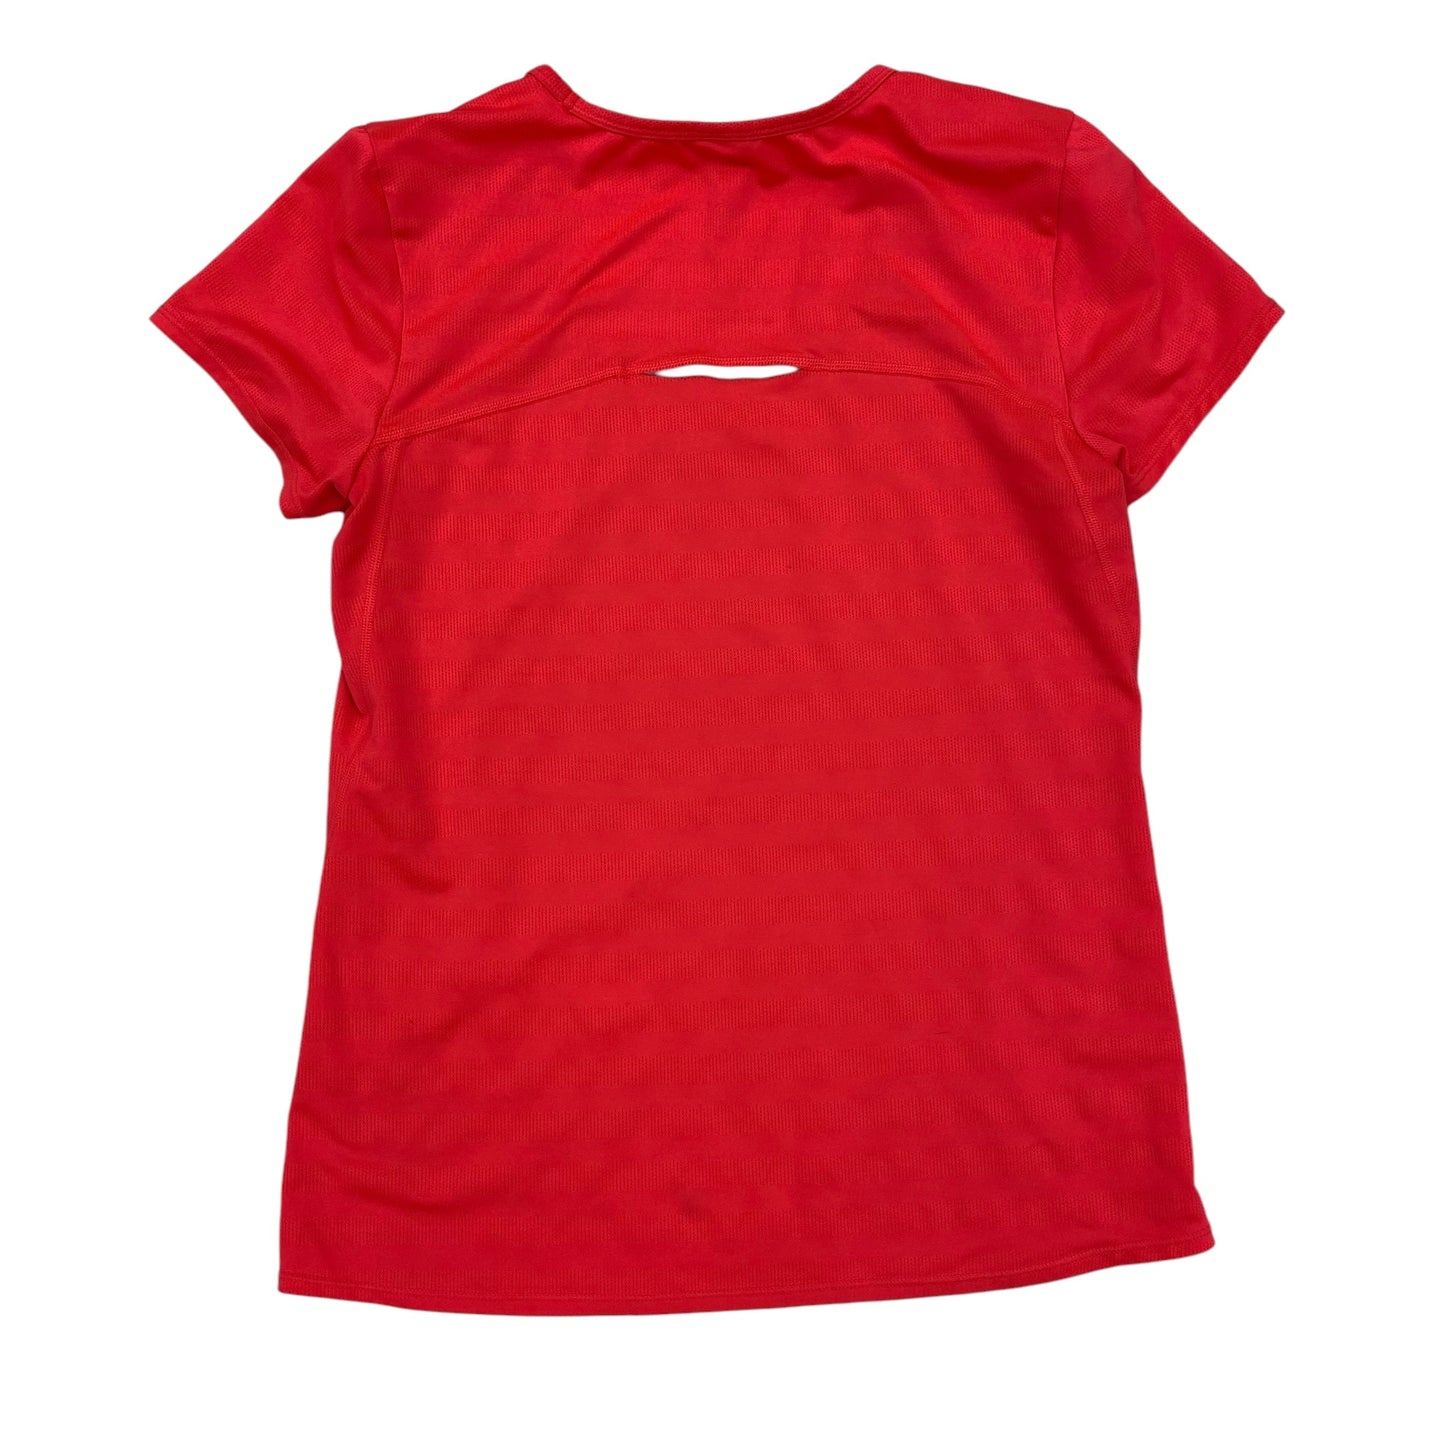 Athletic Top Short Sleeve By Active Life  Size: S